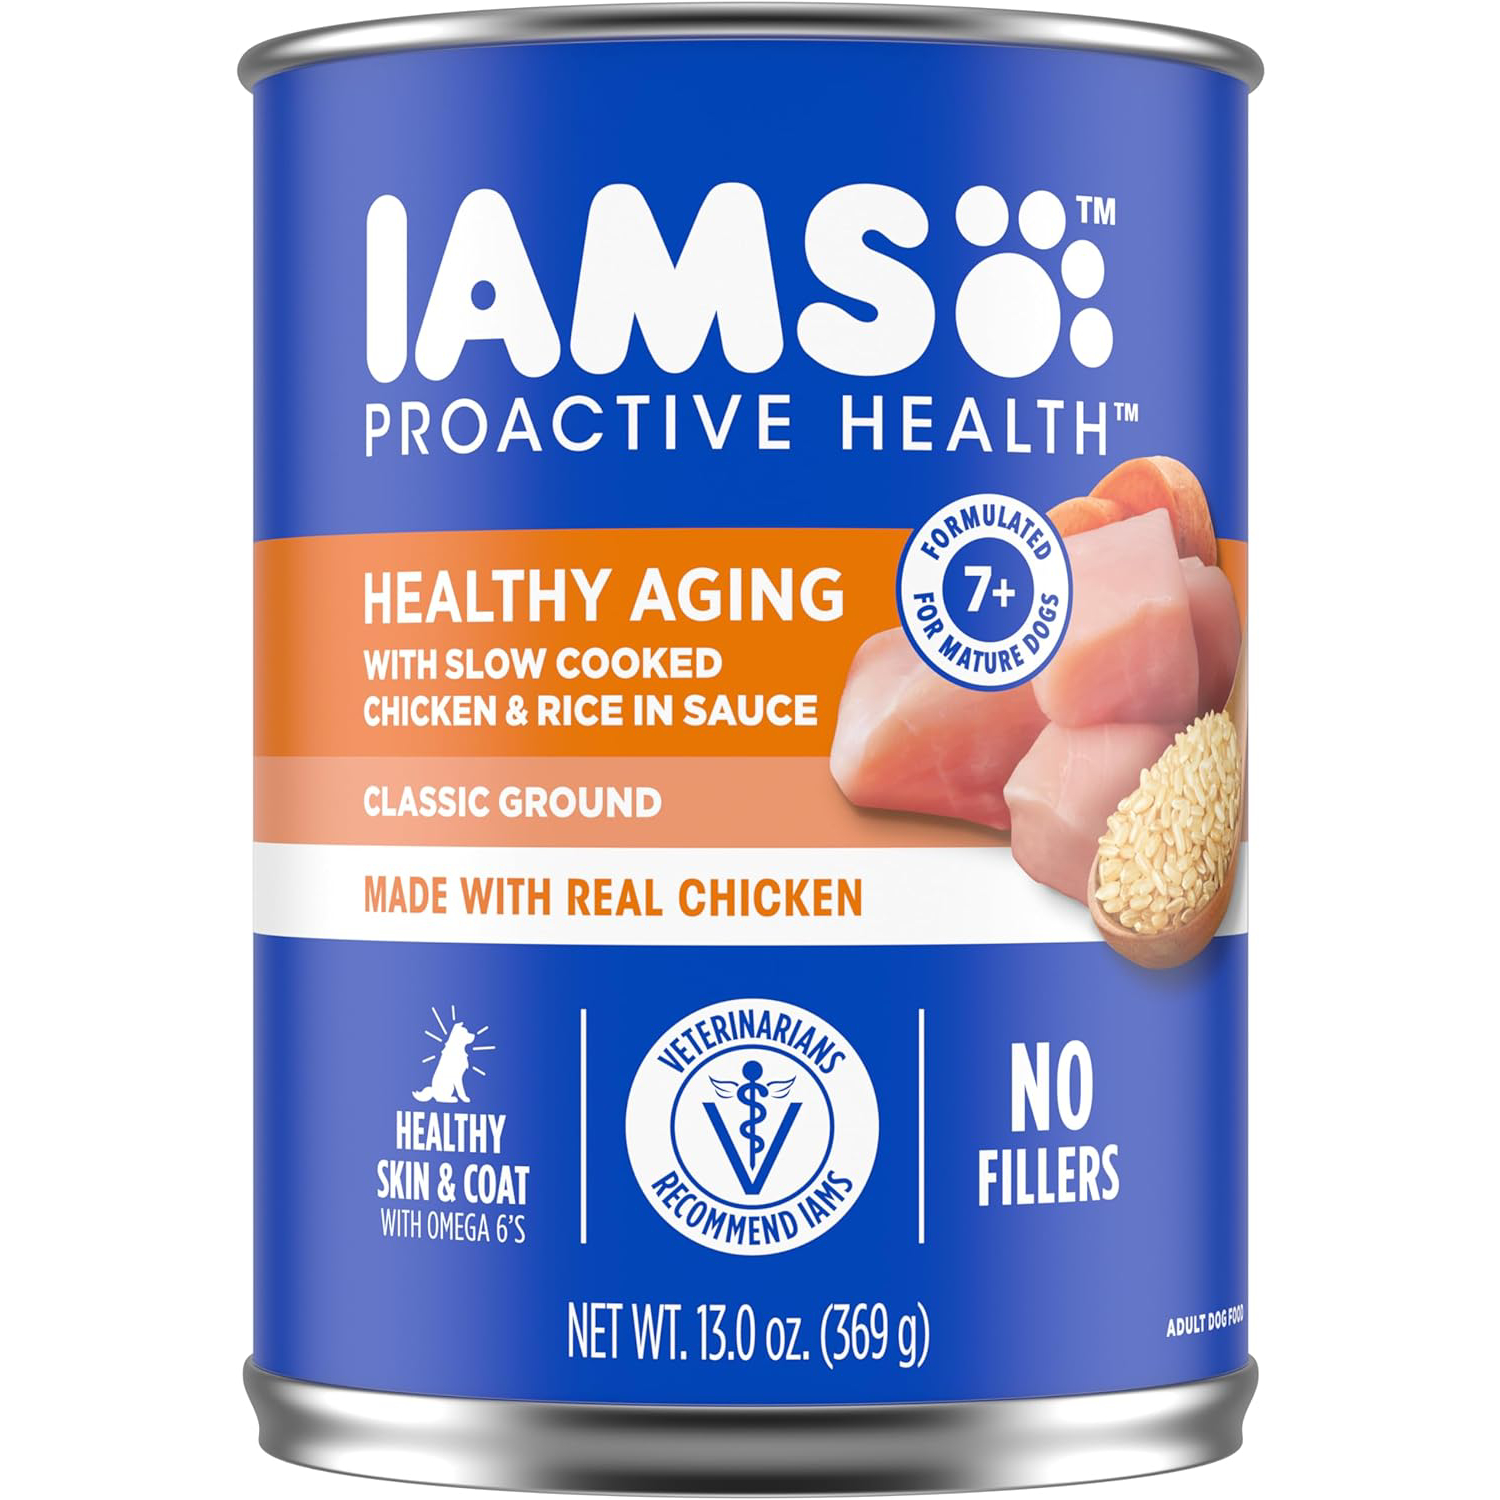 New Project IAMS PROACTIVE HEALTH Healthy Aging Wet Dog Food Classic Ground with Slow Cooked Chicken and Rice 